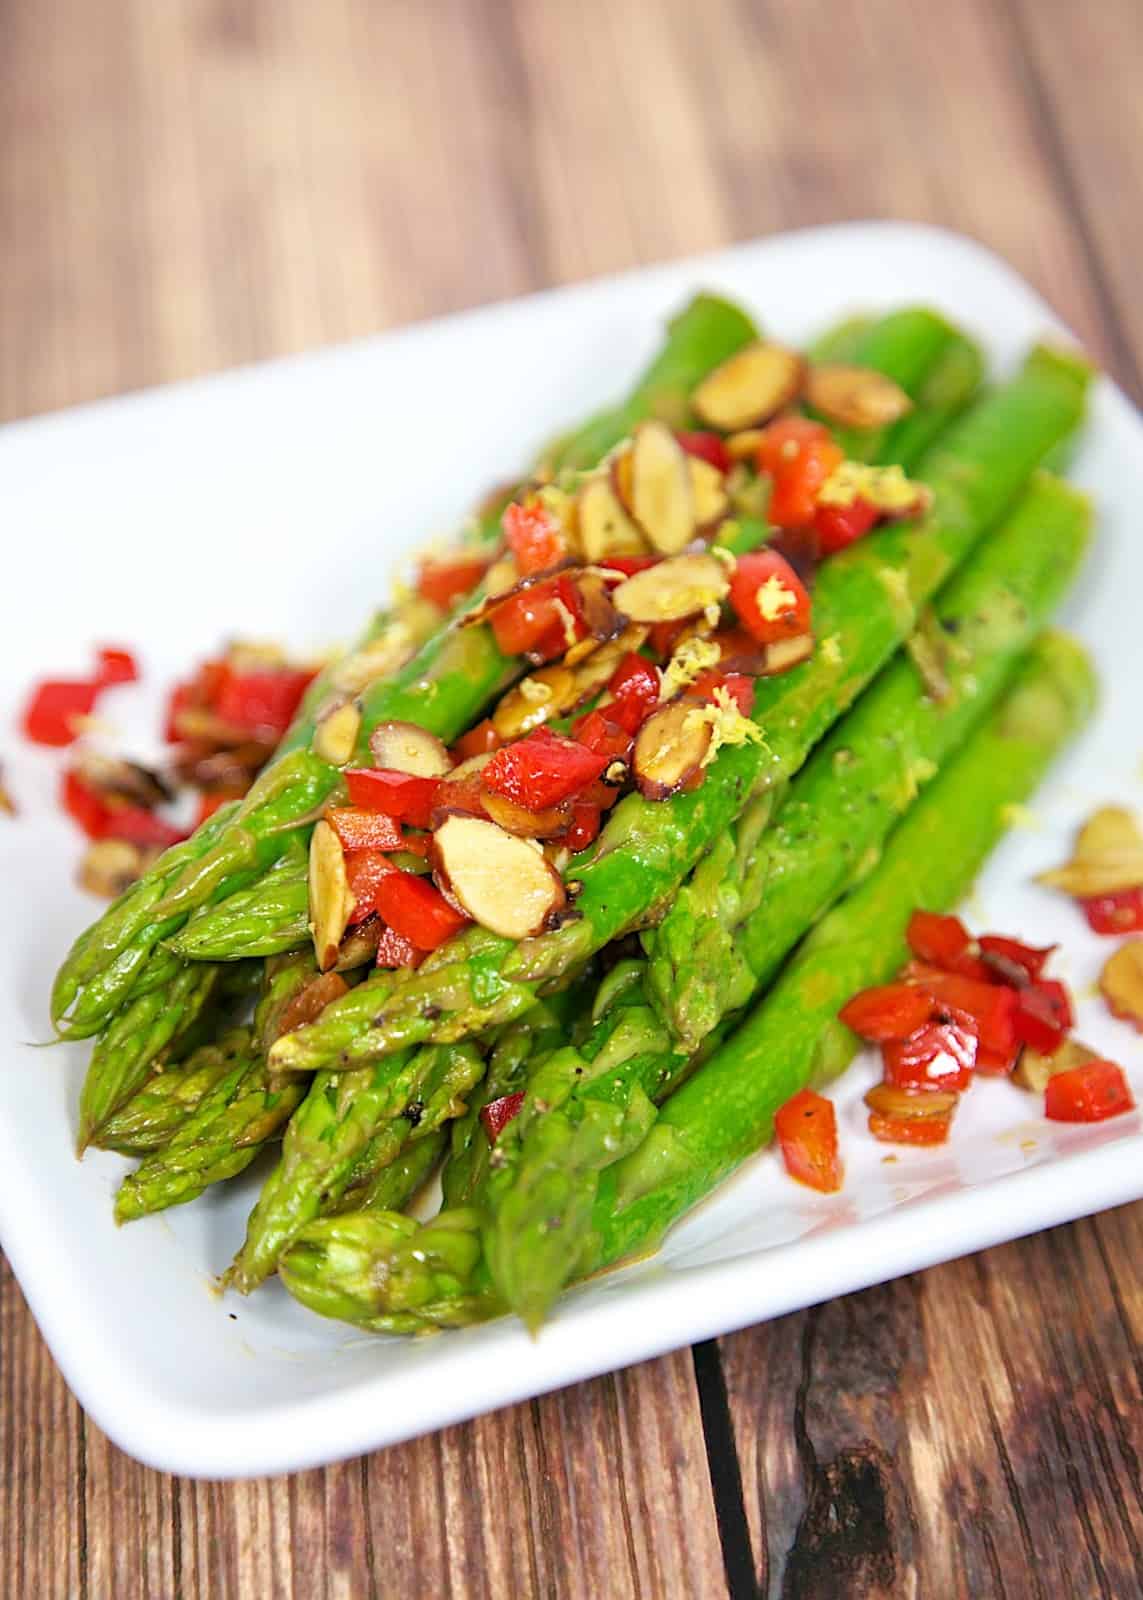 Asparagus Amandine - fresh asparagus, red bell pepper, almonds, butter and lemon juice. Ready in minutes!